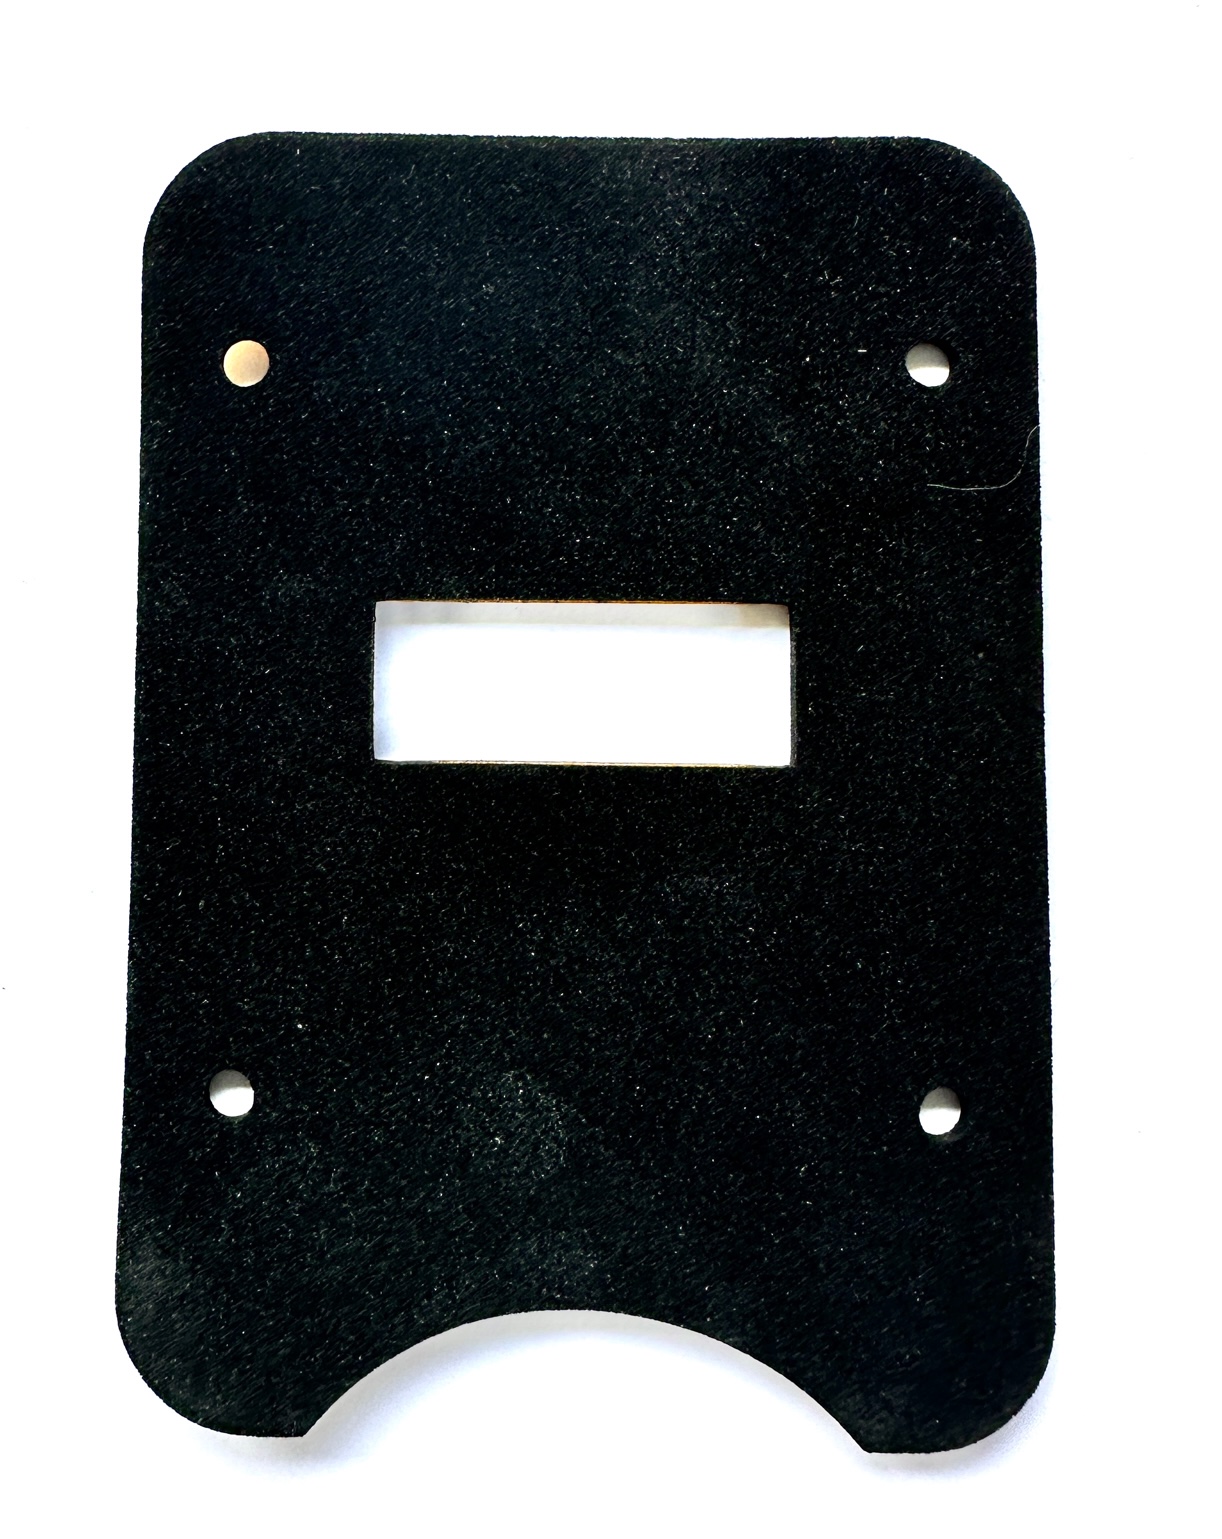 Seal for battery base plate